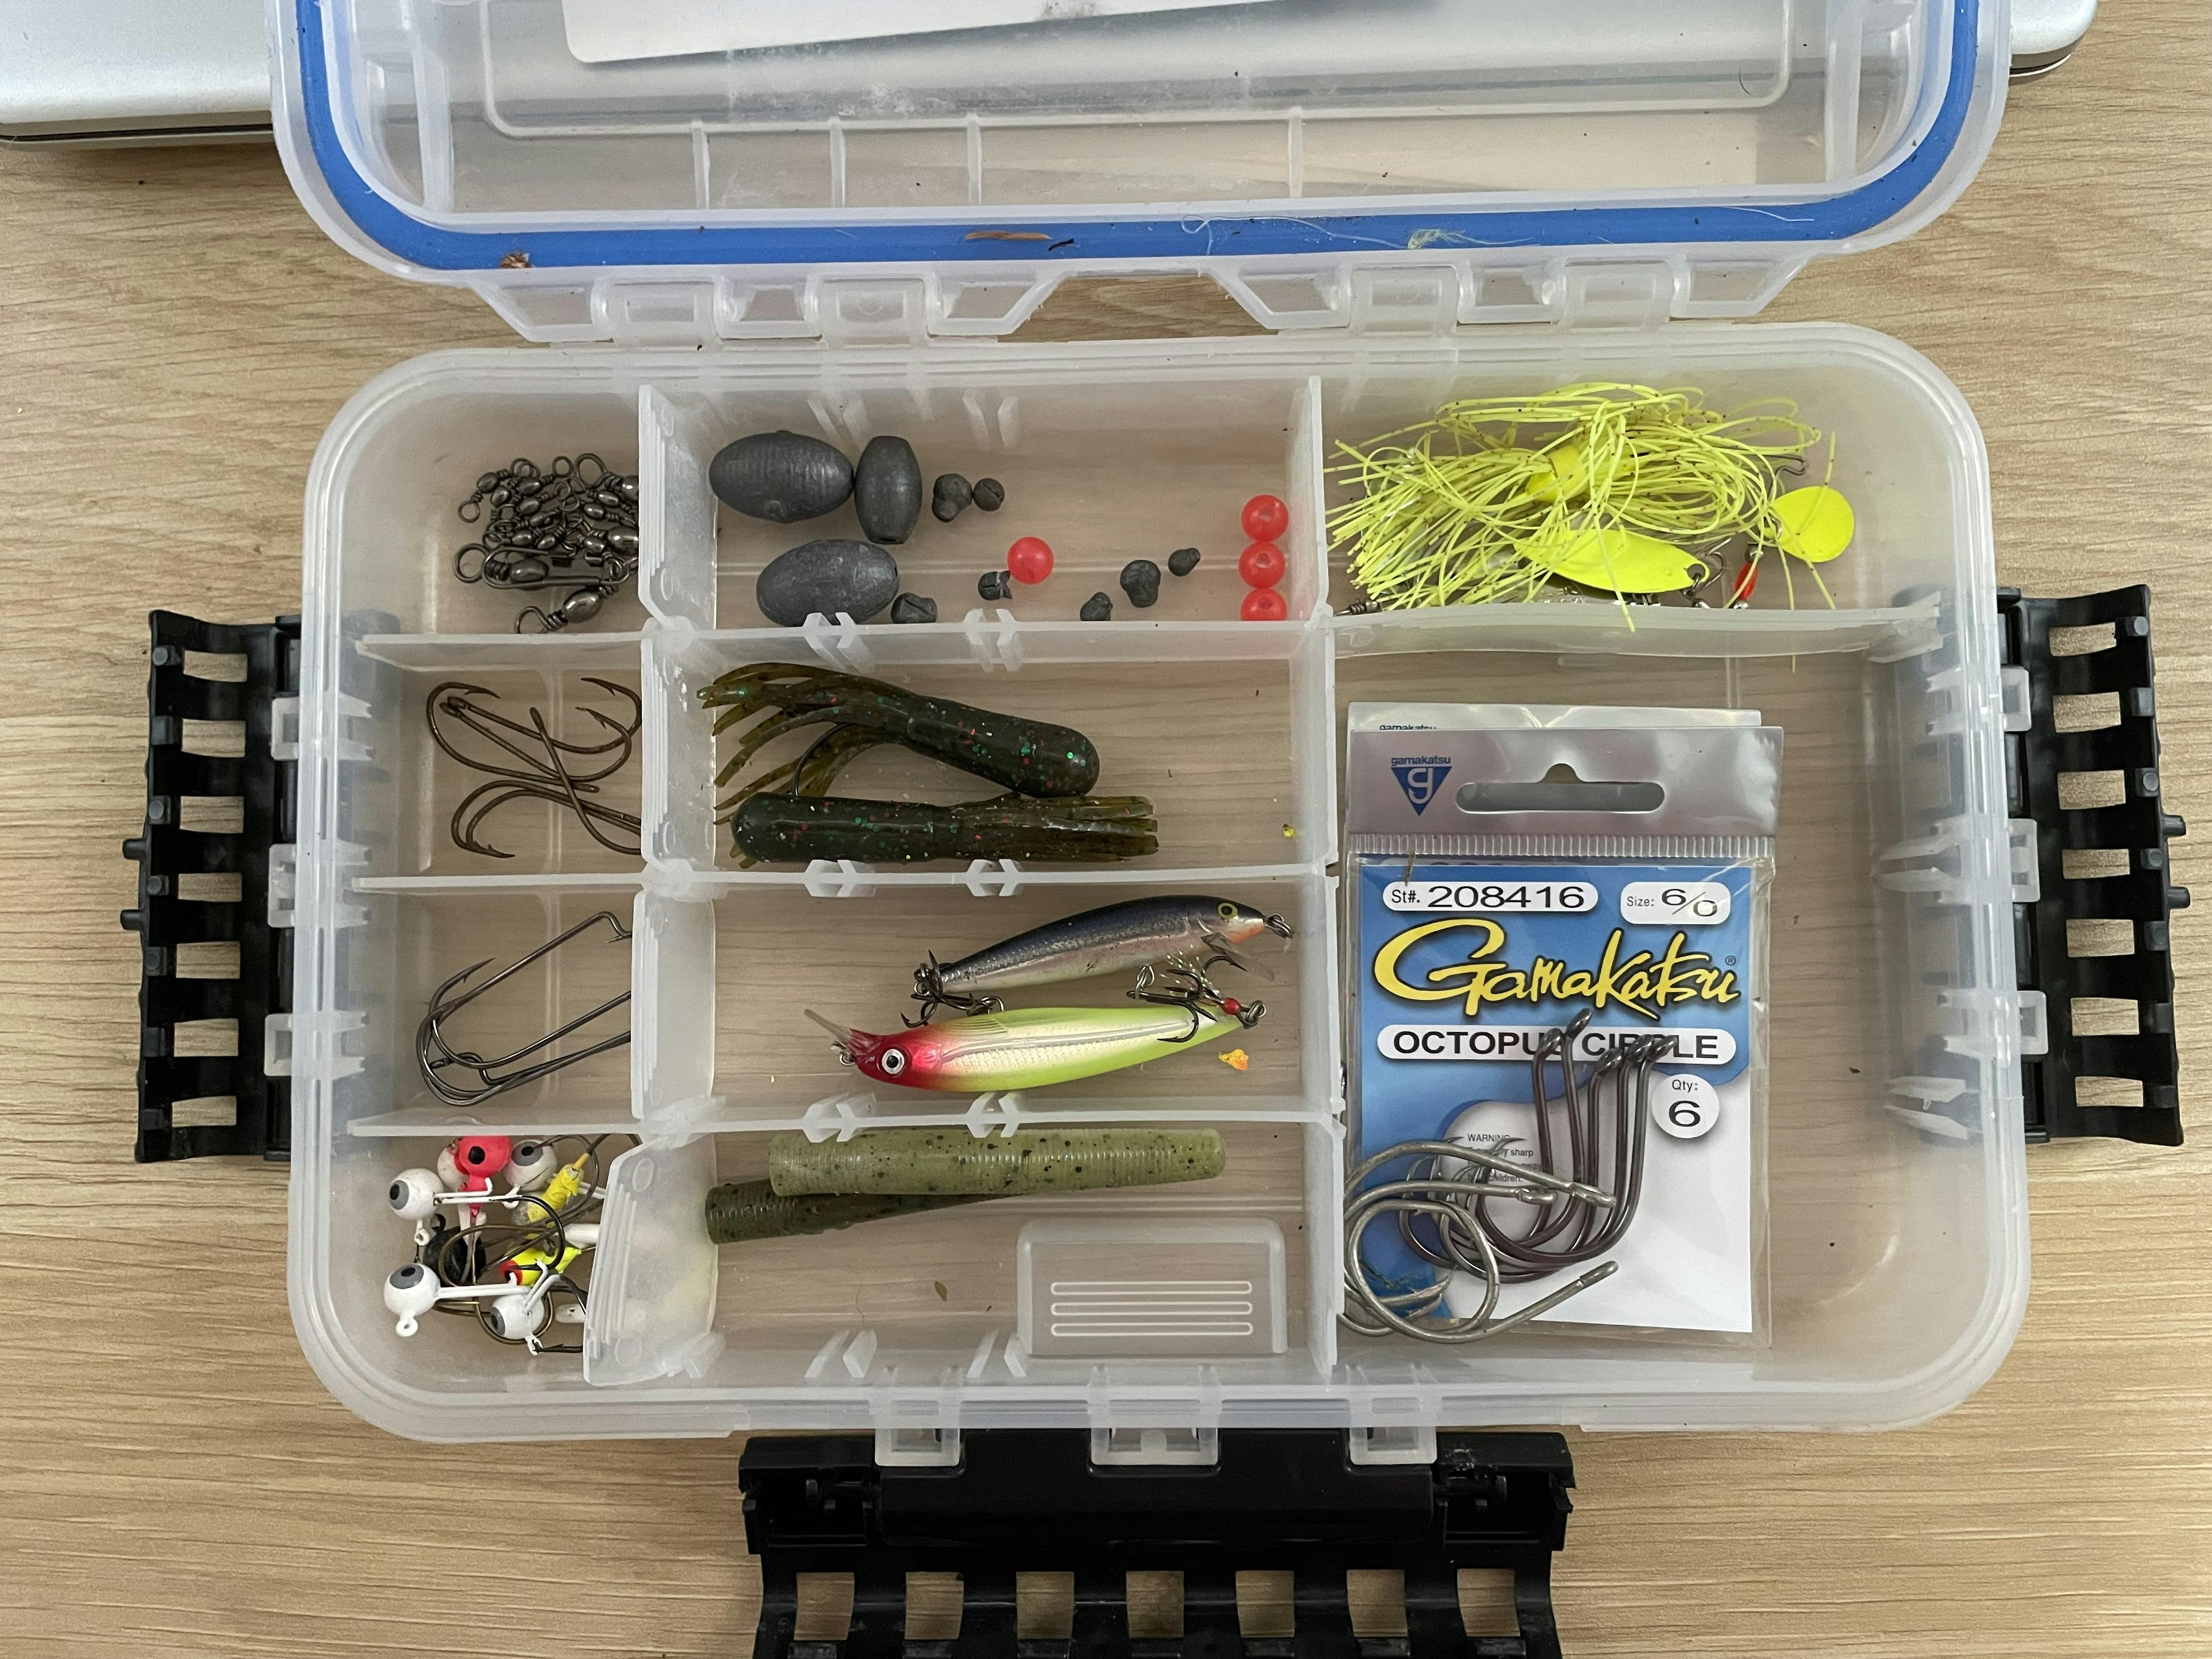 Suggest you the fishing gear you need to include in your fishing